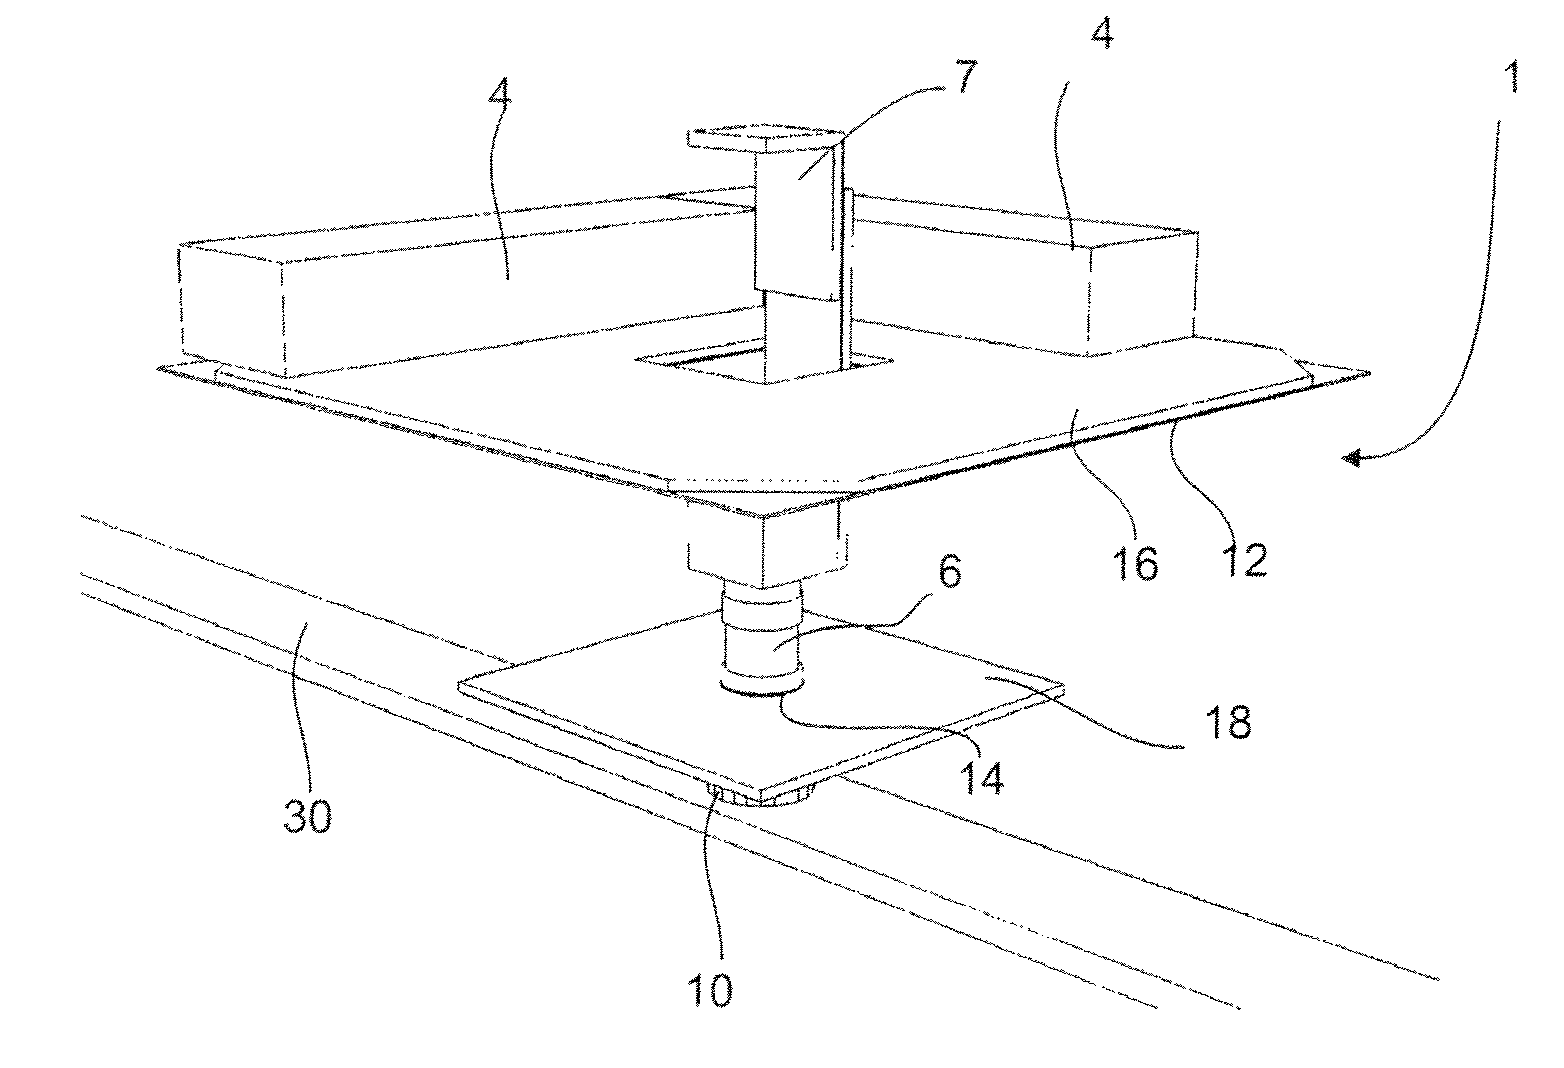 Inspection device for inspecting container closures